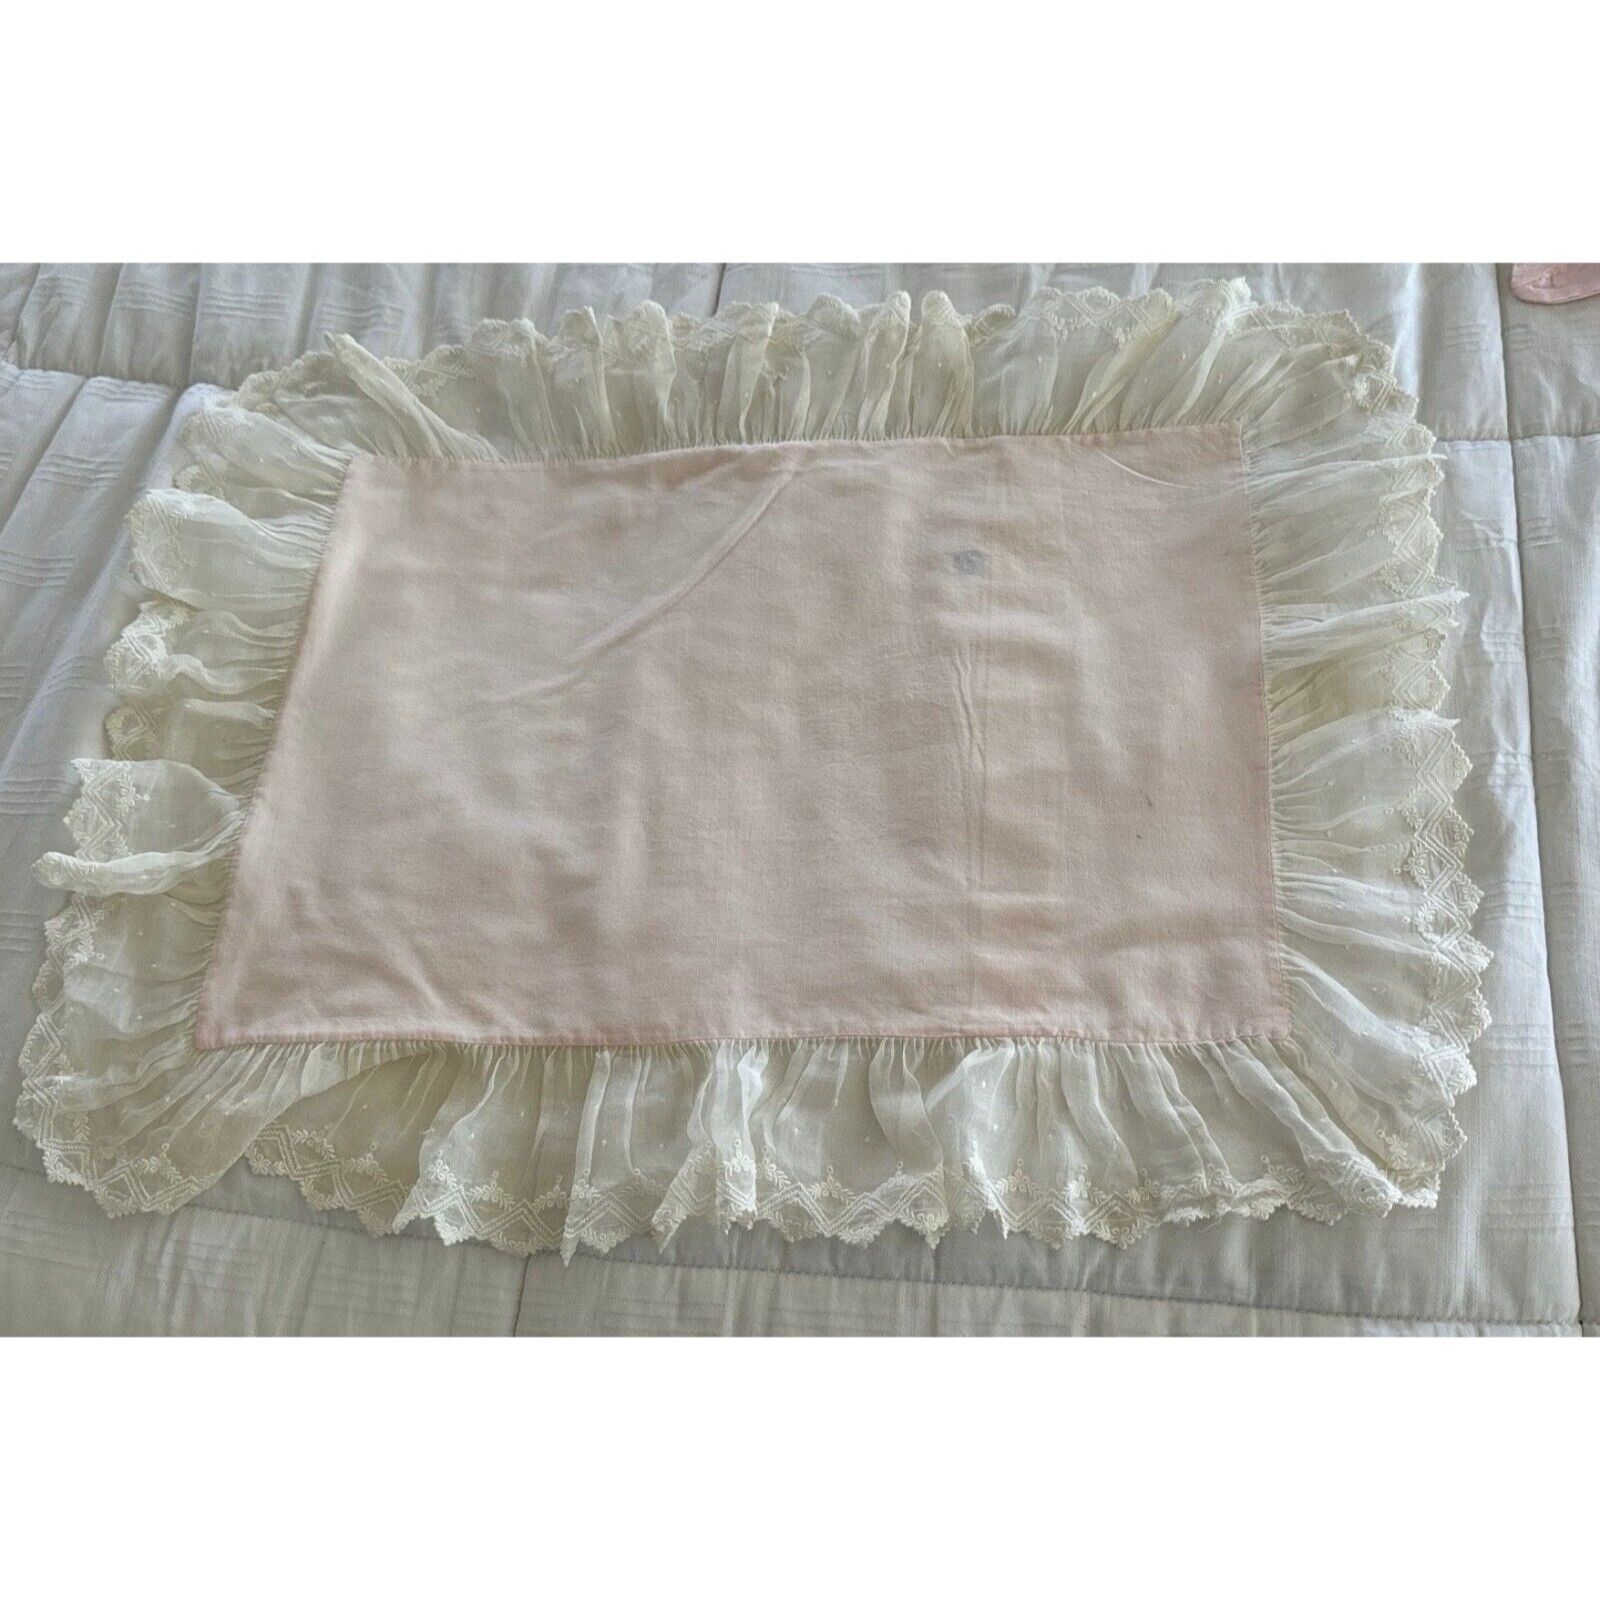 Vintage Handmade RN Custom Made Pink Baby Pillow Case With Handmade White Lace